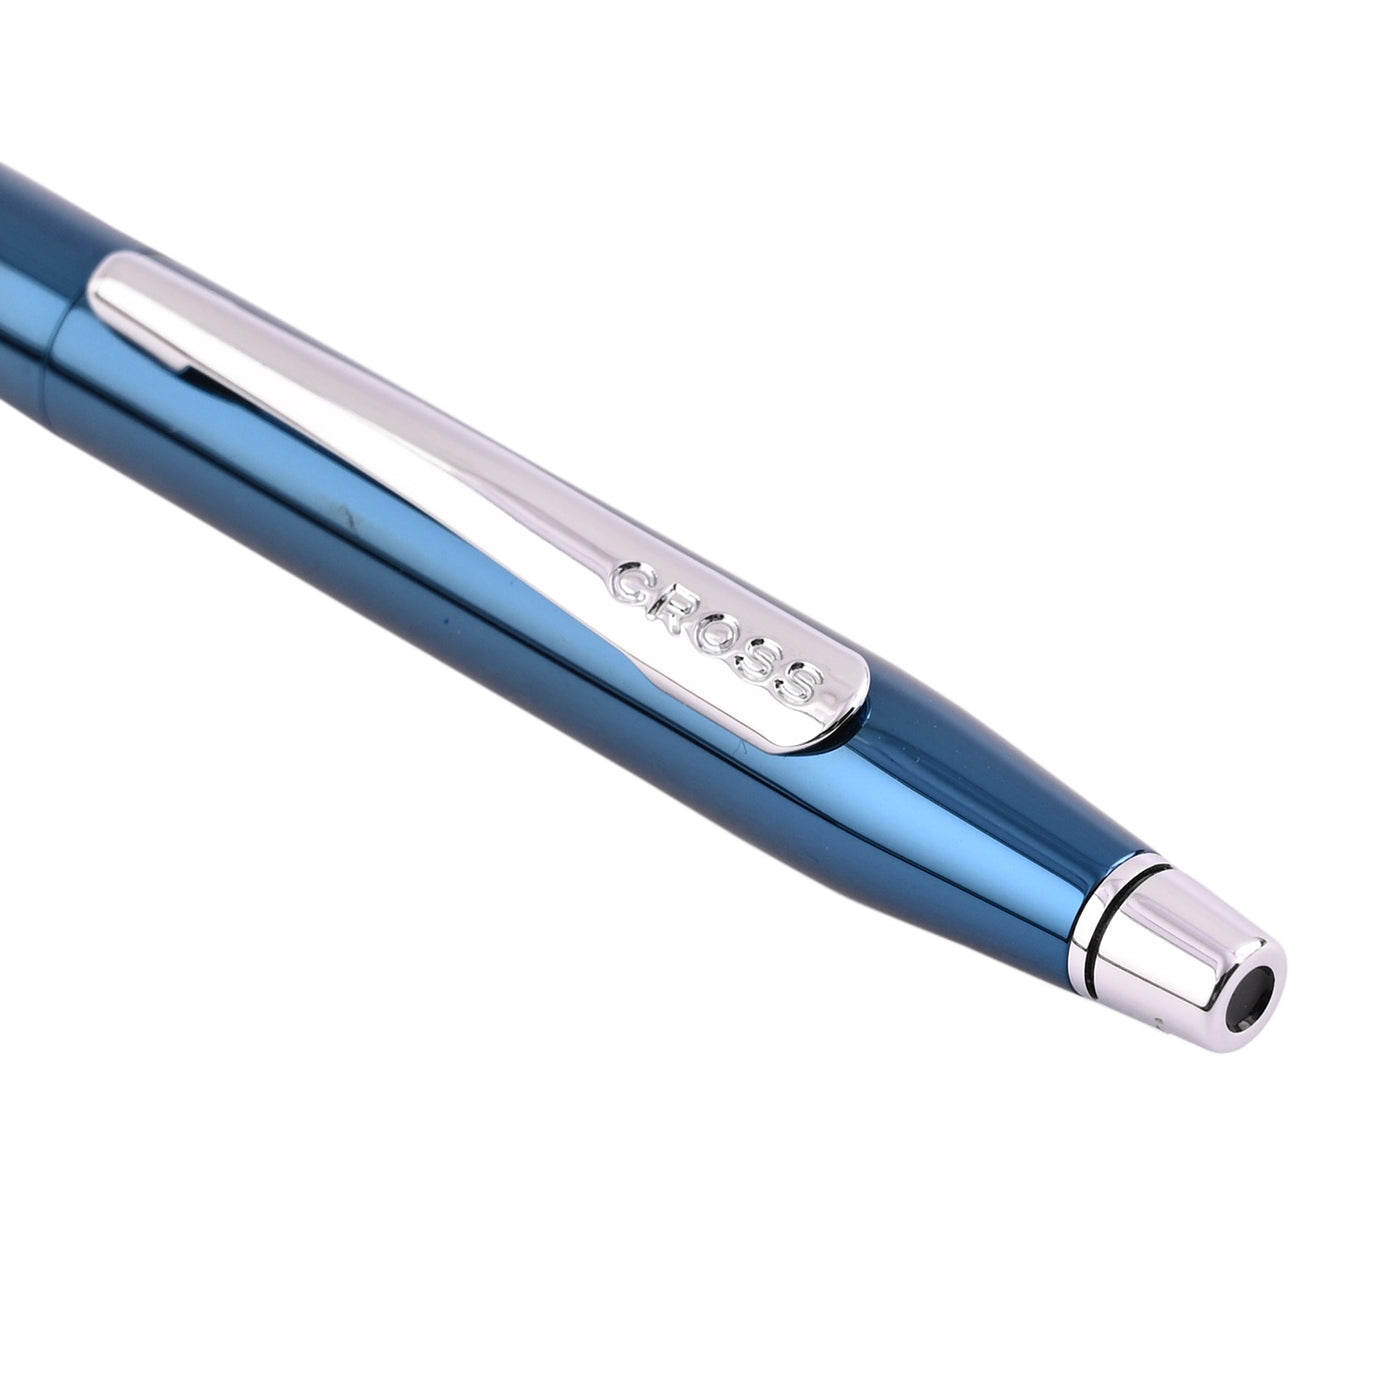 Cross Classic Century Ball Pen - Translucent Blue PVD (Special Edition) 3